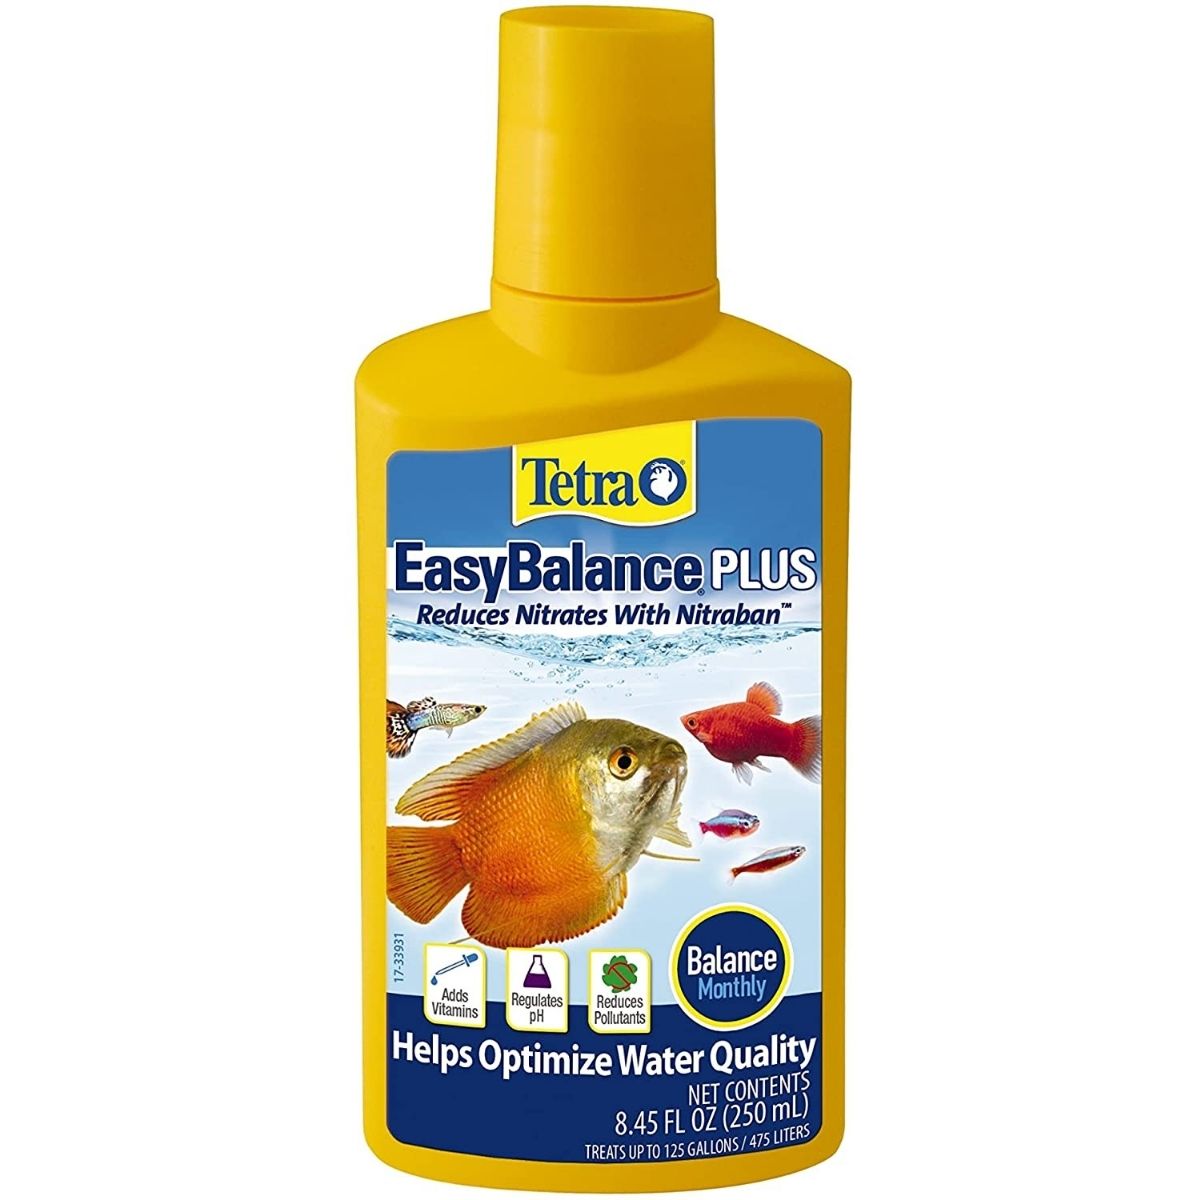 The Best Nitrate Remover Option: Tetra Easy Balance Plus